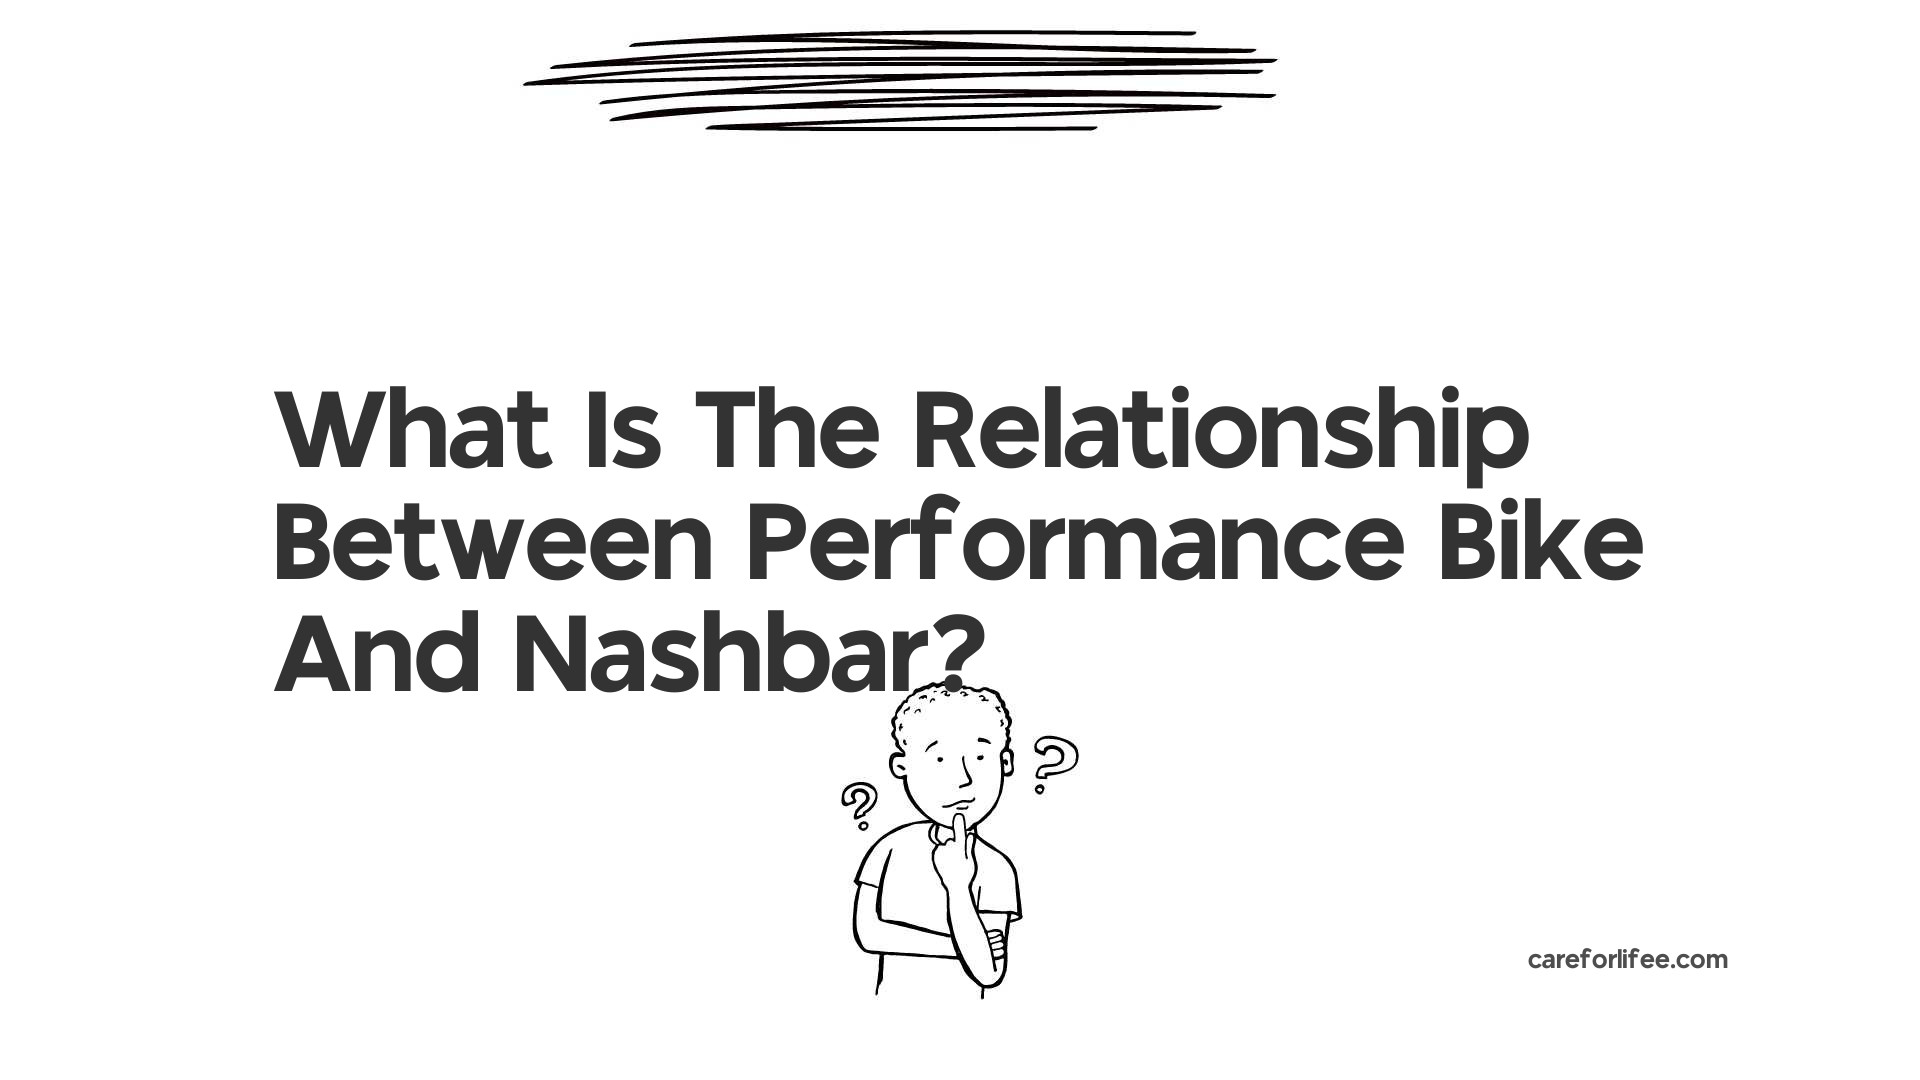 What Is The Relationship Between Performance Bike And Nashbar?